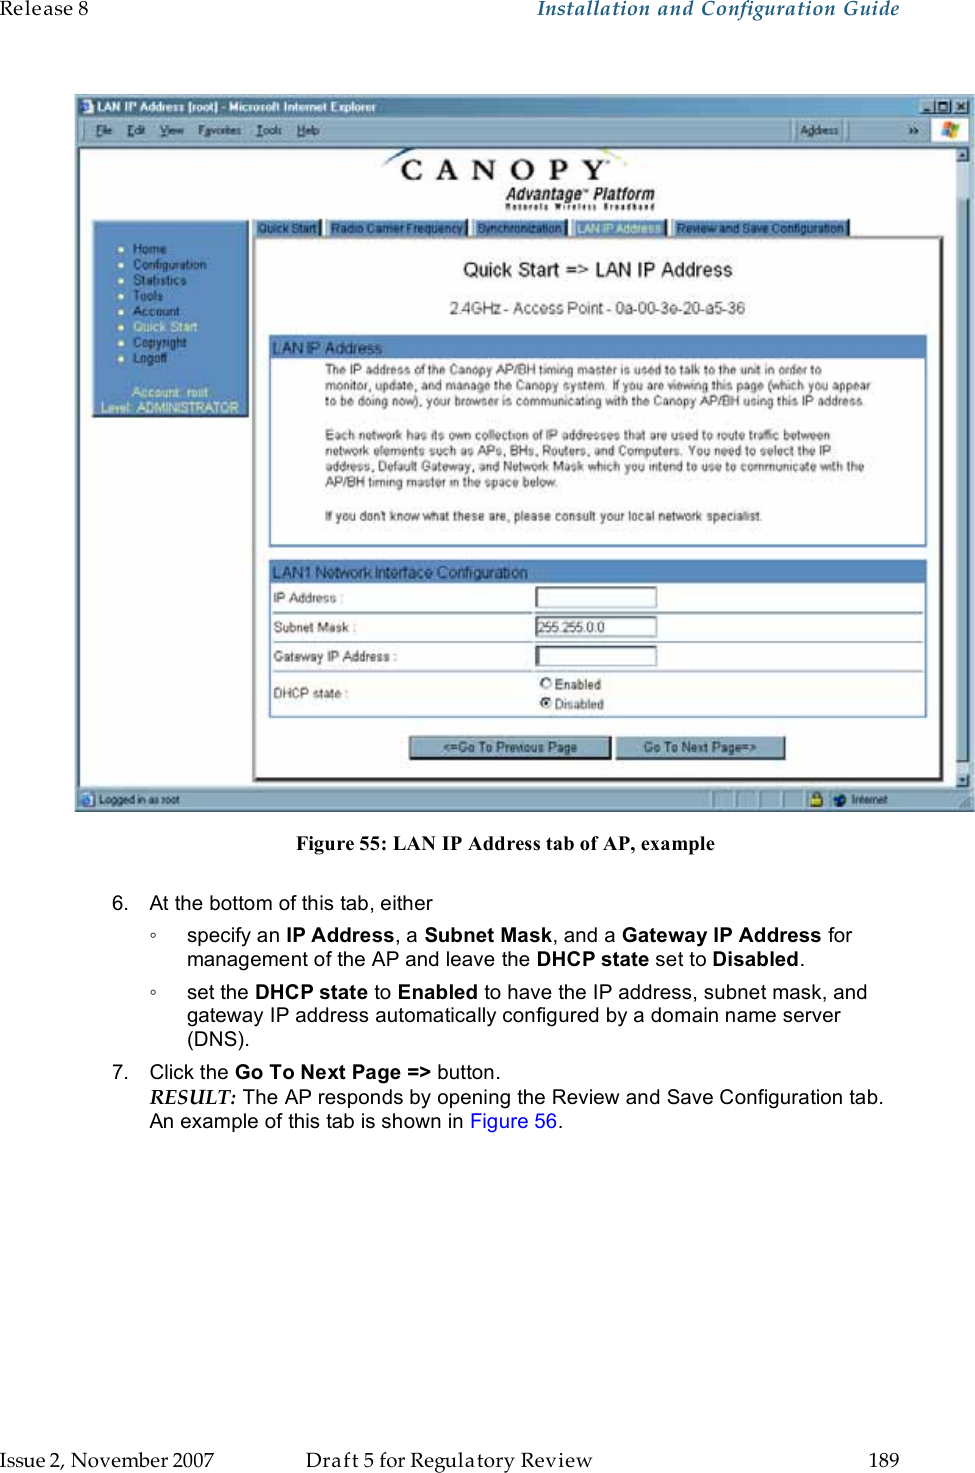 Release 8    Installation and Configuration Guide   Issue 2, November 2007  Draft 5 for Regulatory Review  189       Figure 55: LAN IP Address tab of AP, example  6.  At the bottom of this tab, either ◦  specify an IP Address, a Subnet Mask, and a Gateway IP Address for management of the AP and leave the DHCP state set to Disabled. ◦  set the DHCP state to Enabled to have the IP address, subnet mask, and gateway IP address automatically configured by a domain name server (DNS). 7.  Click the Go To Next Page =&gt; button. RESULT: The AP responds by opening the Review and Save Configuration tab. An example of this tab is shown in Figure 56. 